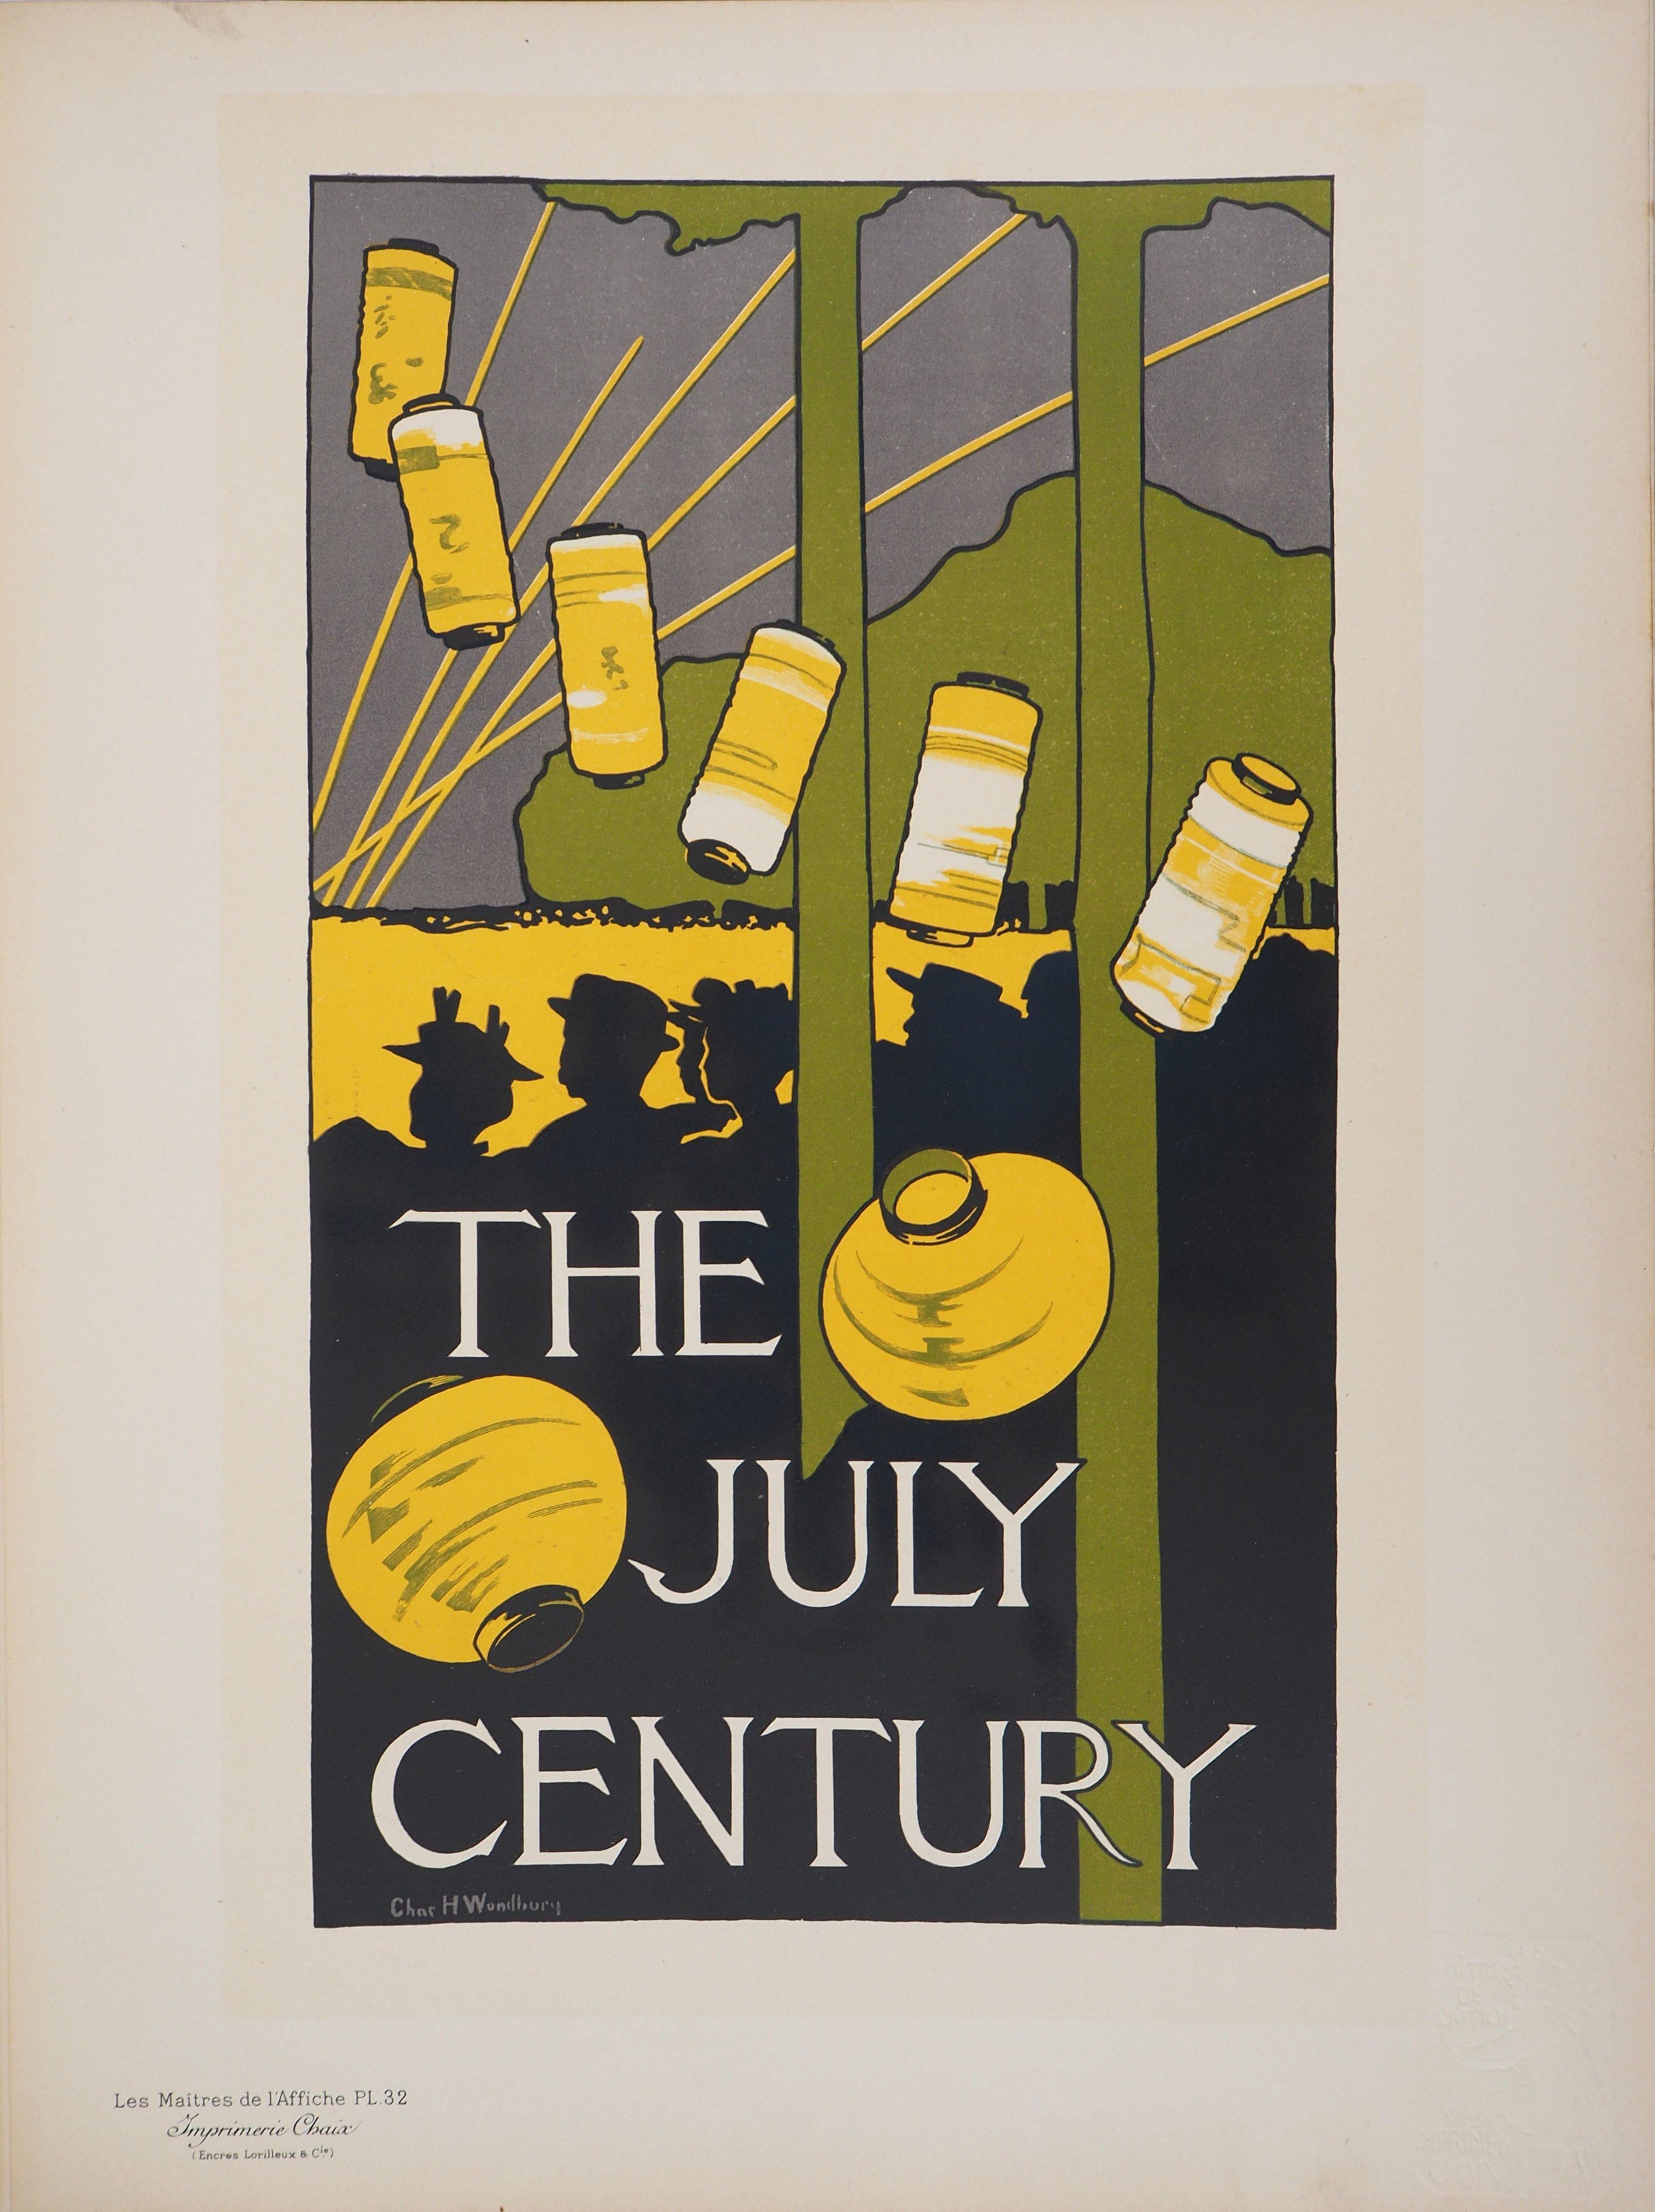 The July Century - Lithograph (Les Maîtres de l'Affiche), 1895 - Print by Charles Herbert Woodbury